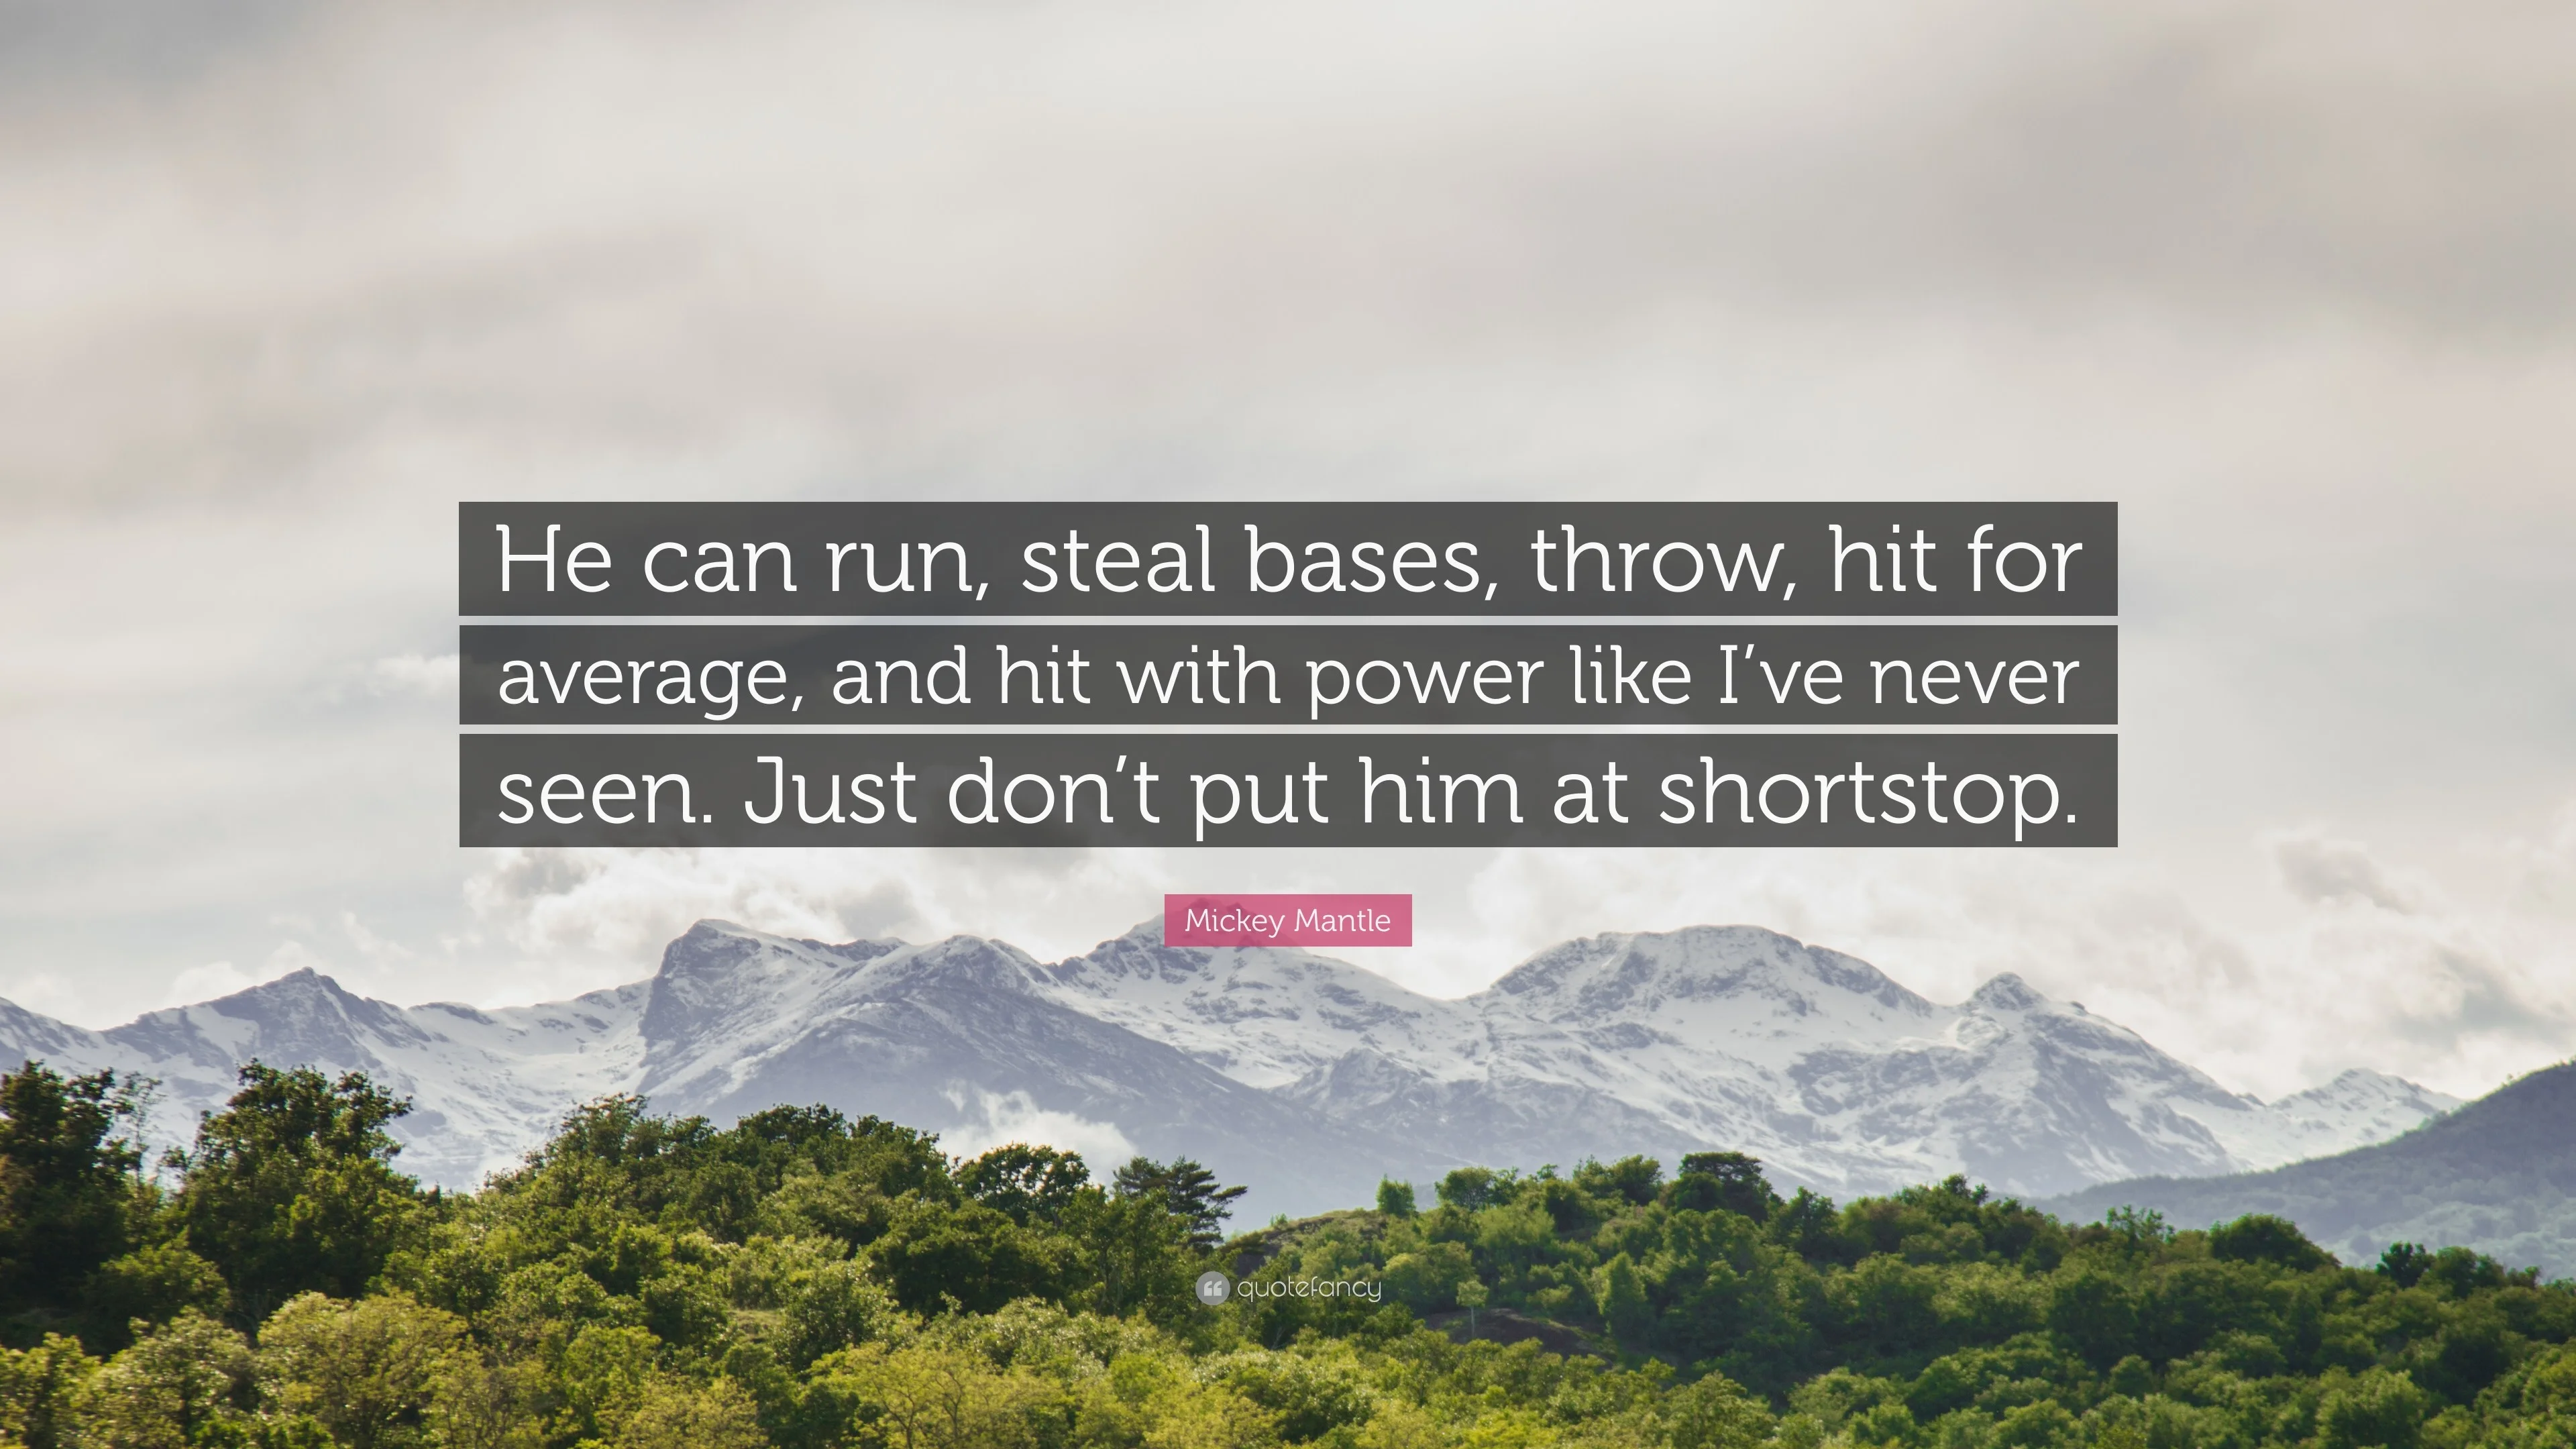 Mickey Mantle Quote: “He can run, steal bases, throw, hit for